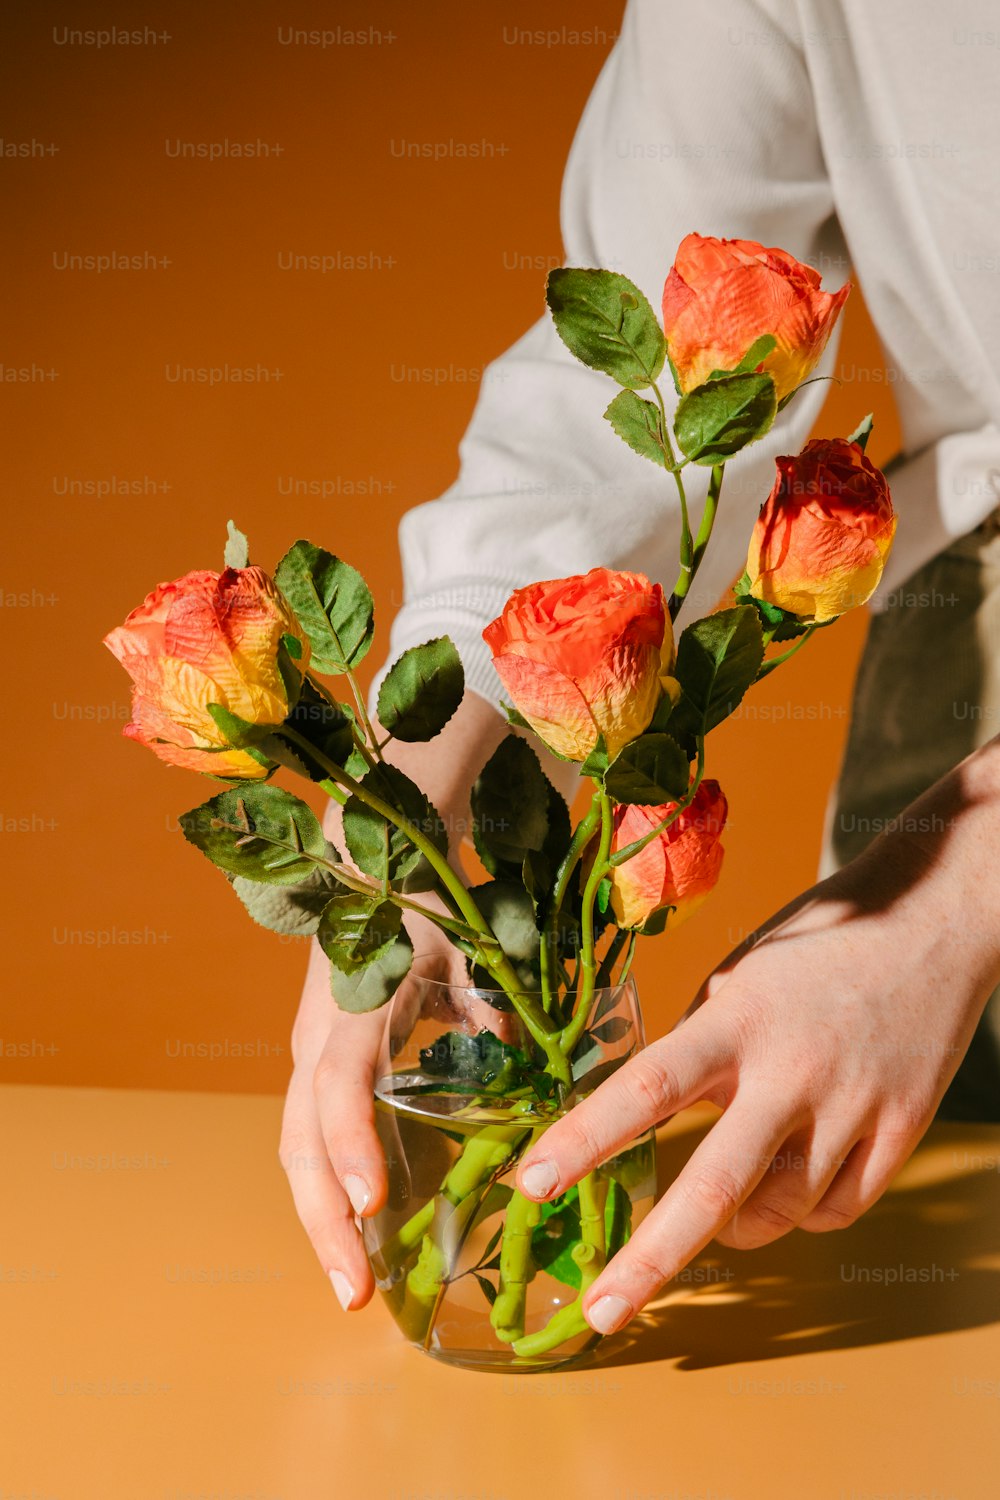 a person holding a vase with flowers in it